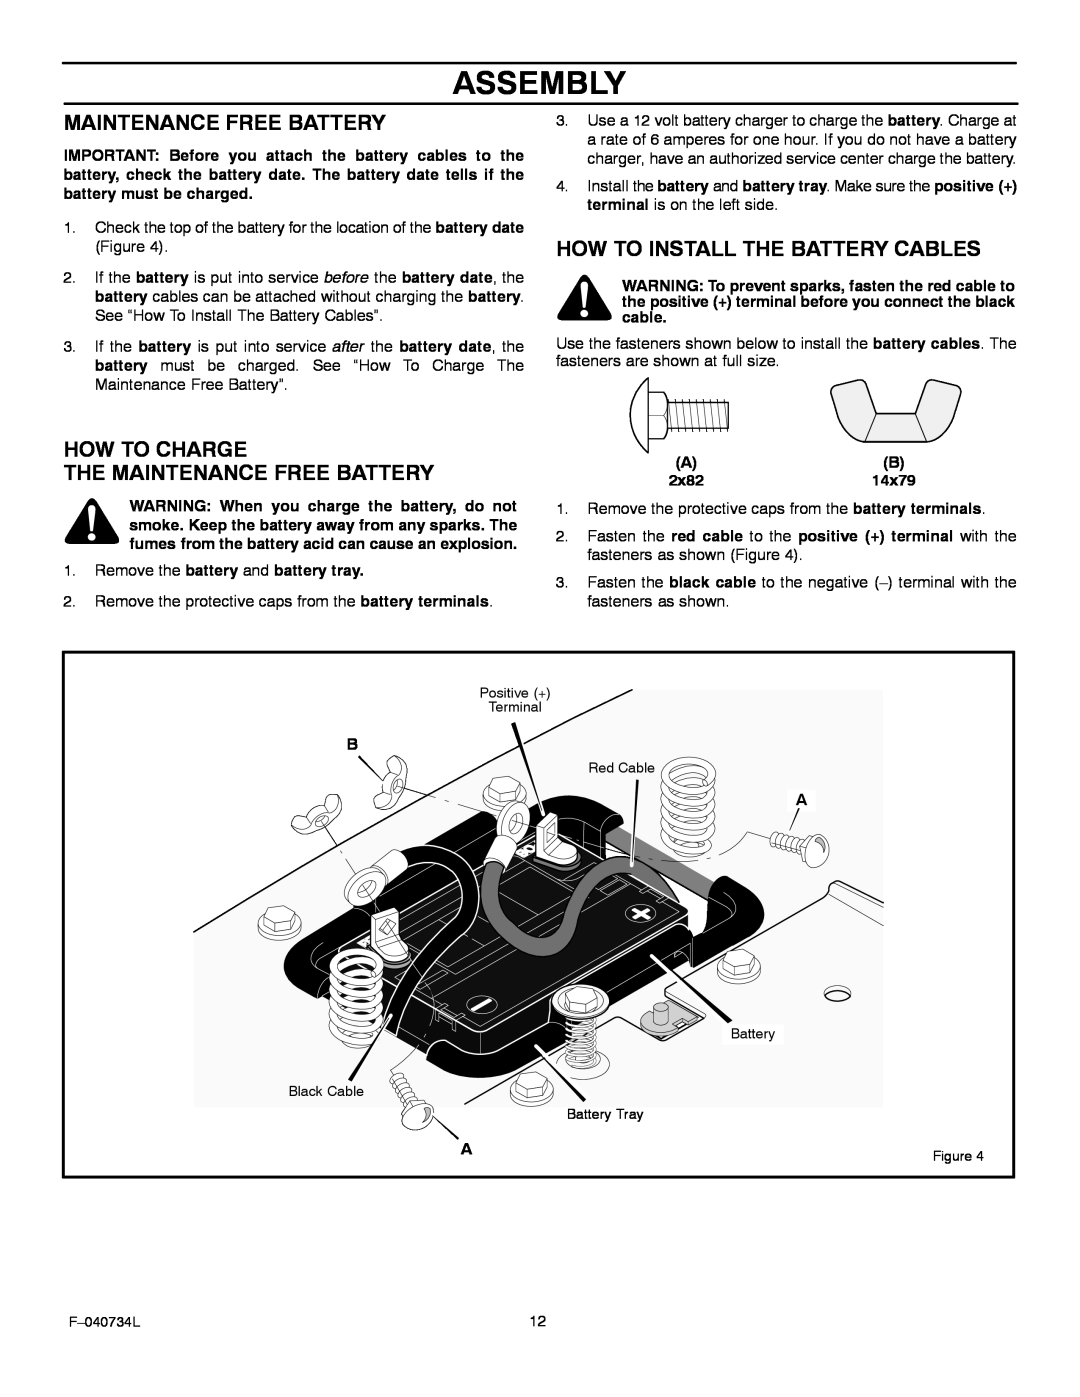 Murray 425015x92A manual Assembly, How To Charge The Maintenance Free Battery, How To Install The Battery Cables 